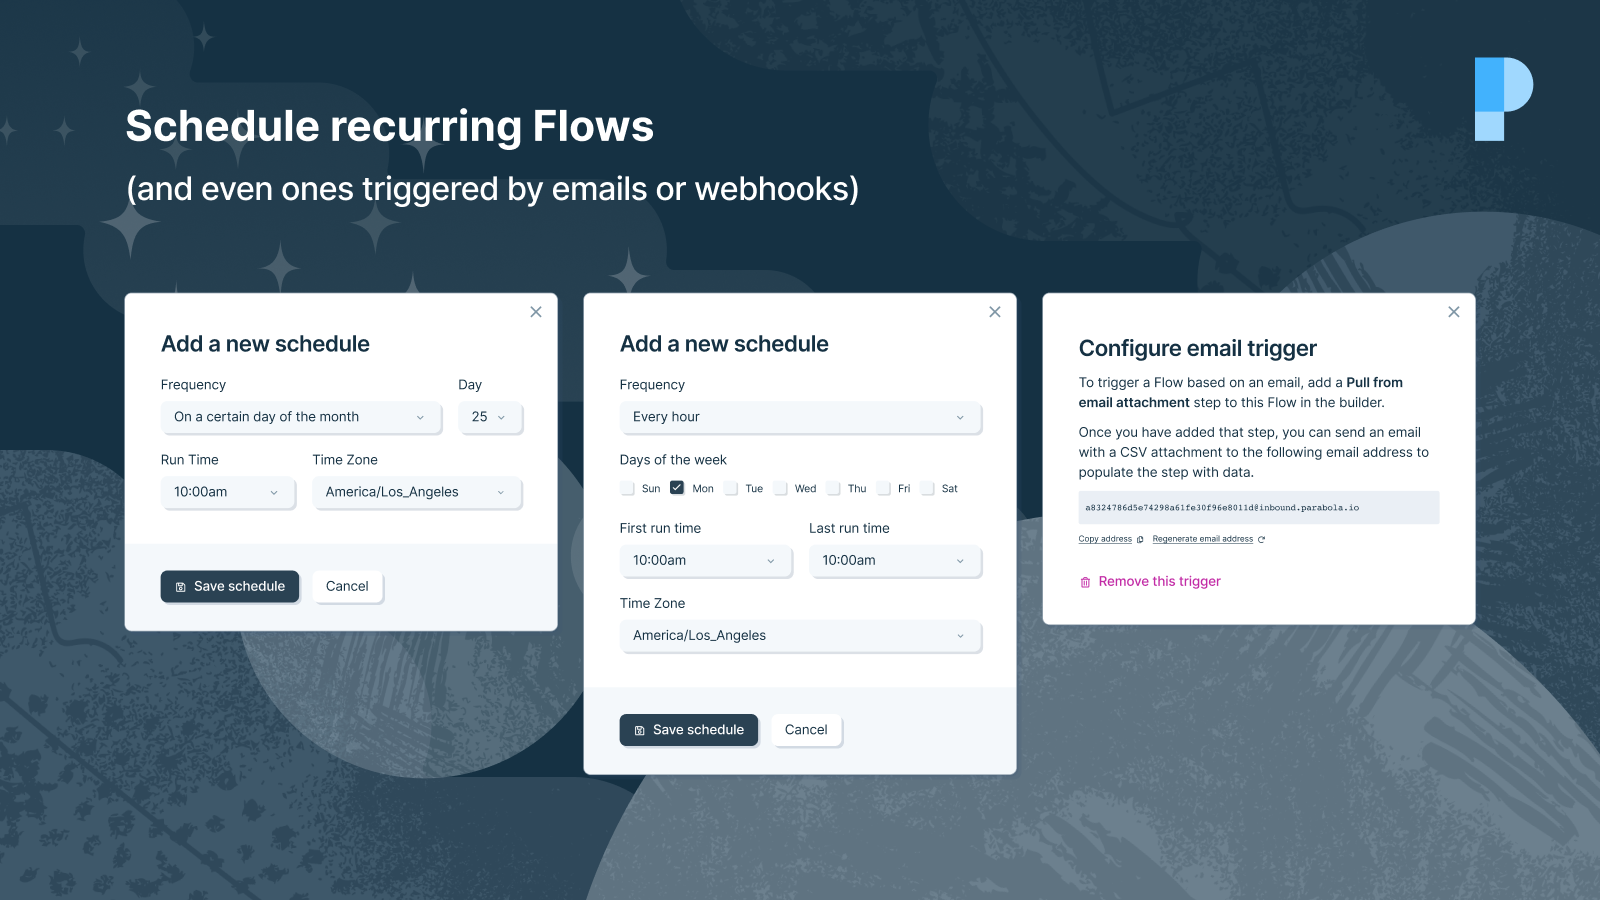 Schedule recurring Flows, and ones triggered by email or webhook